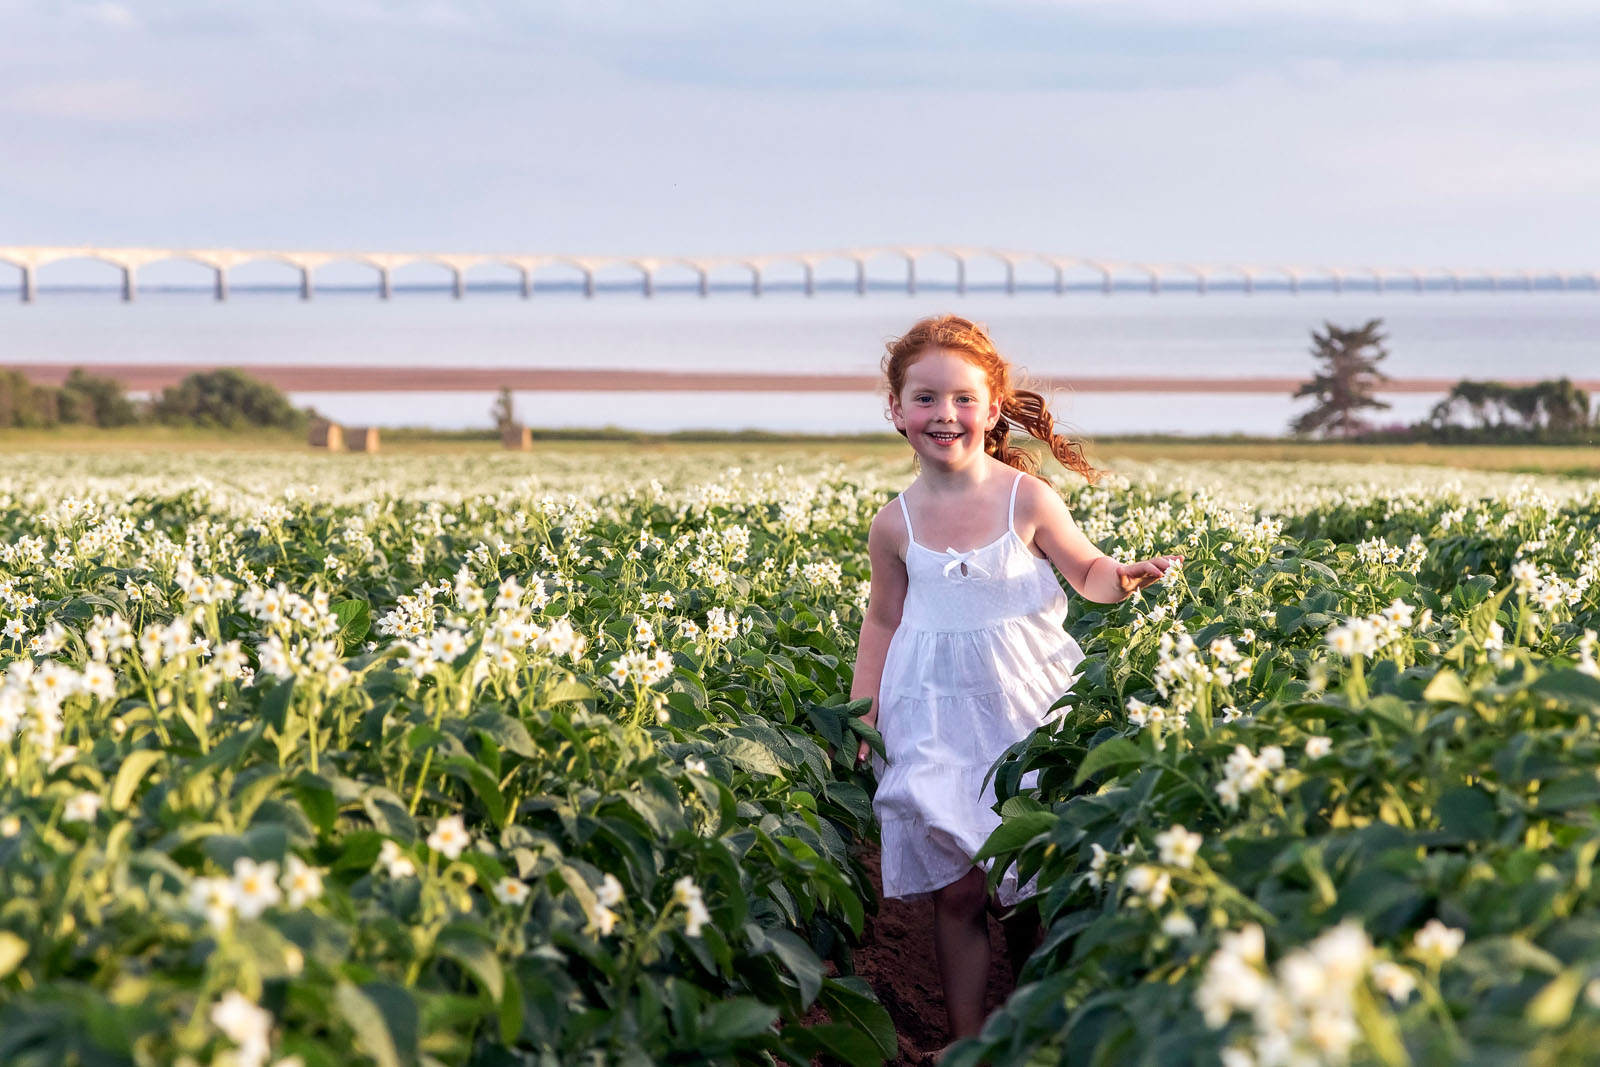 A girl plays in a field of green flowers with ocean in background.